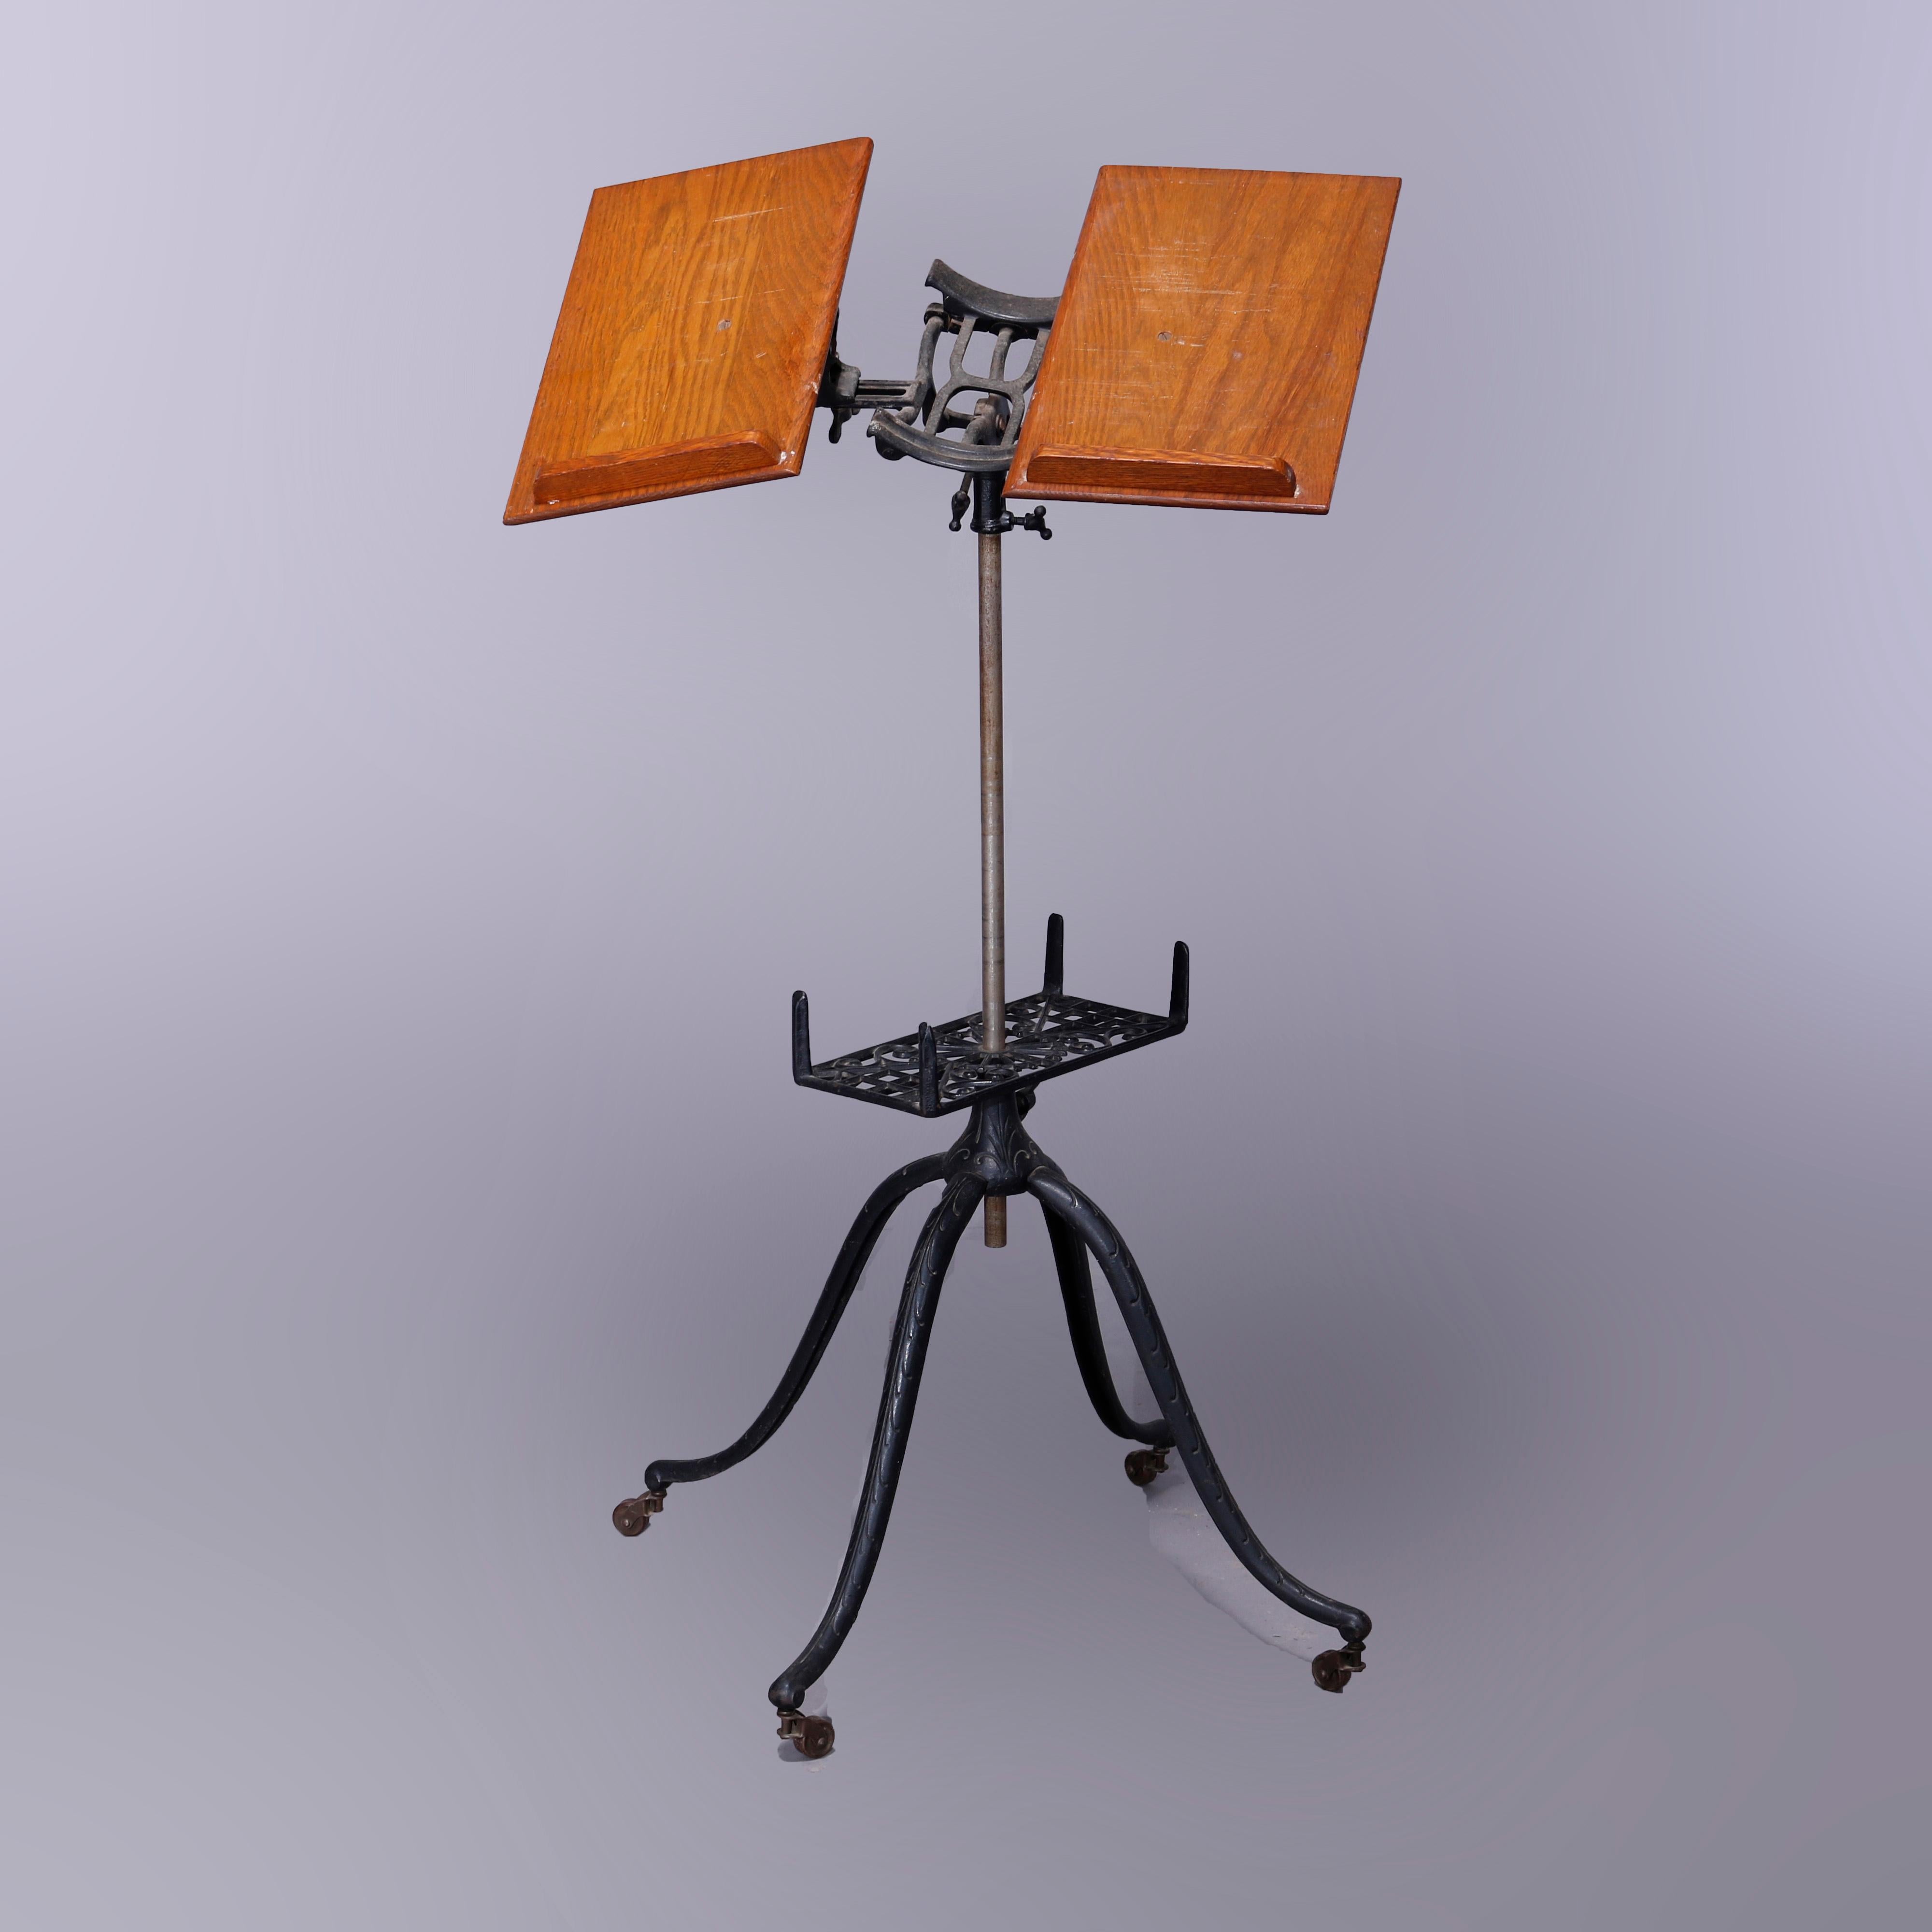 An antique Arts & Crafts library or parlor dictionary book stand offers cast iron quadripod base with cabriole legs and pierced cast foliate lower shelf surmounted by adjustable display, seated on casters, circa 1920.

Measures - 47''H x 23.25''W x